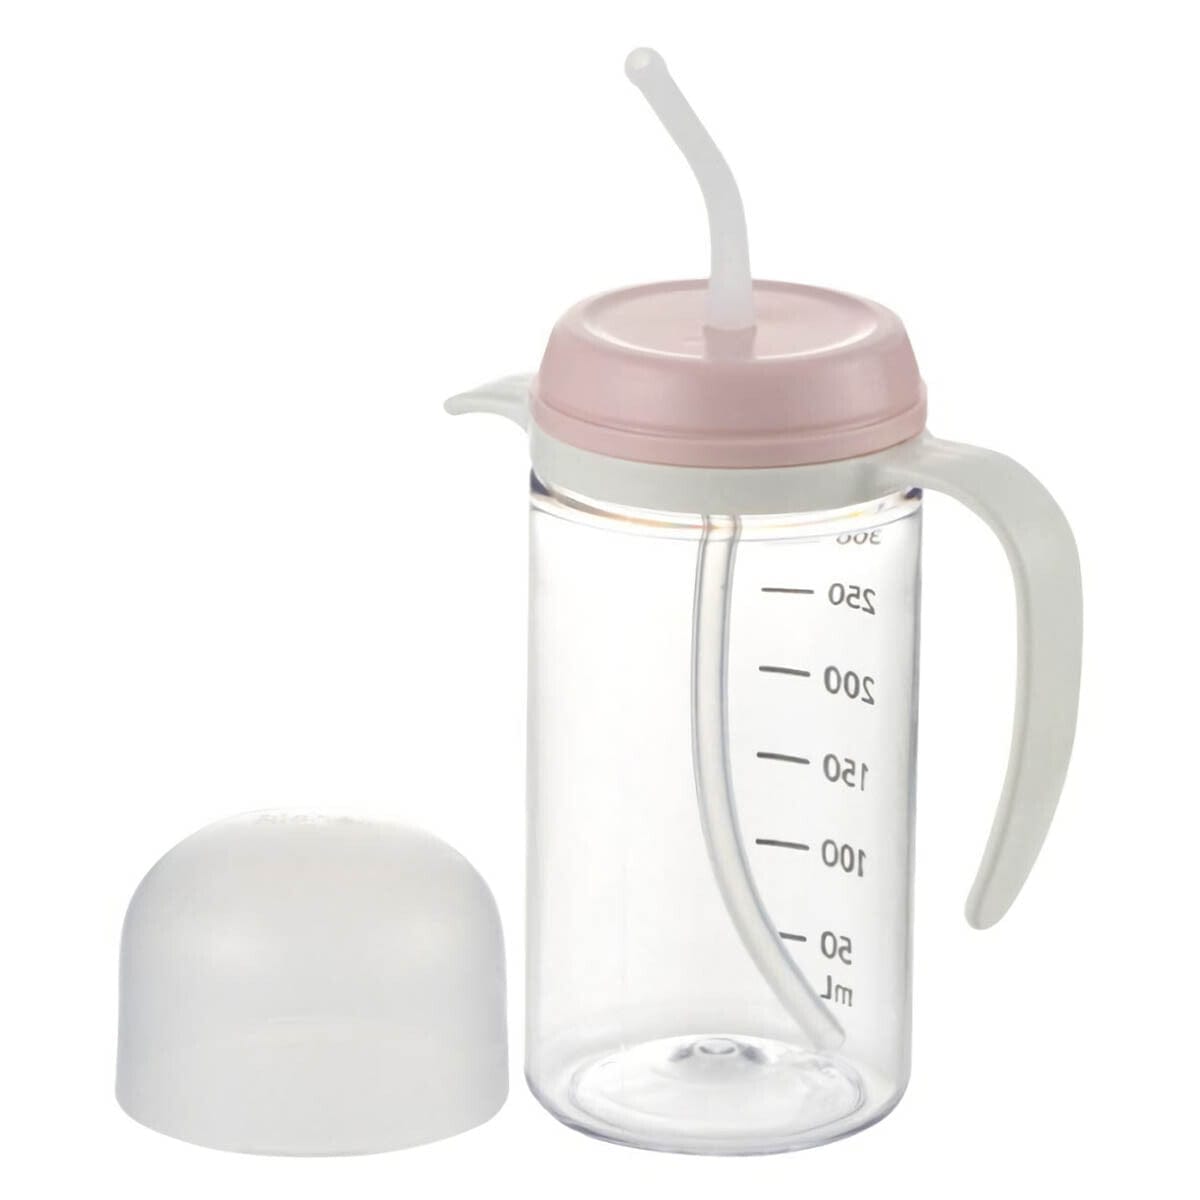 Richell - You Can Use It Easy Handle Clear Drinking Straw Cup -  Baby Cup  Durio.sg